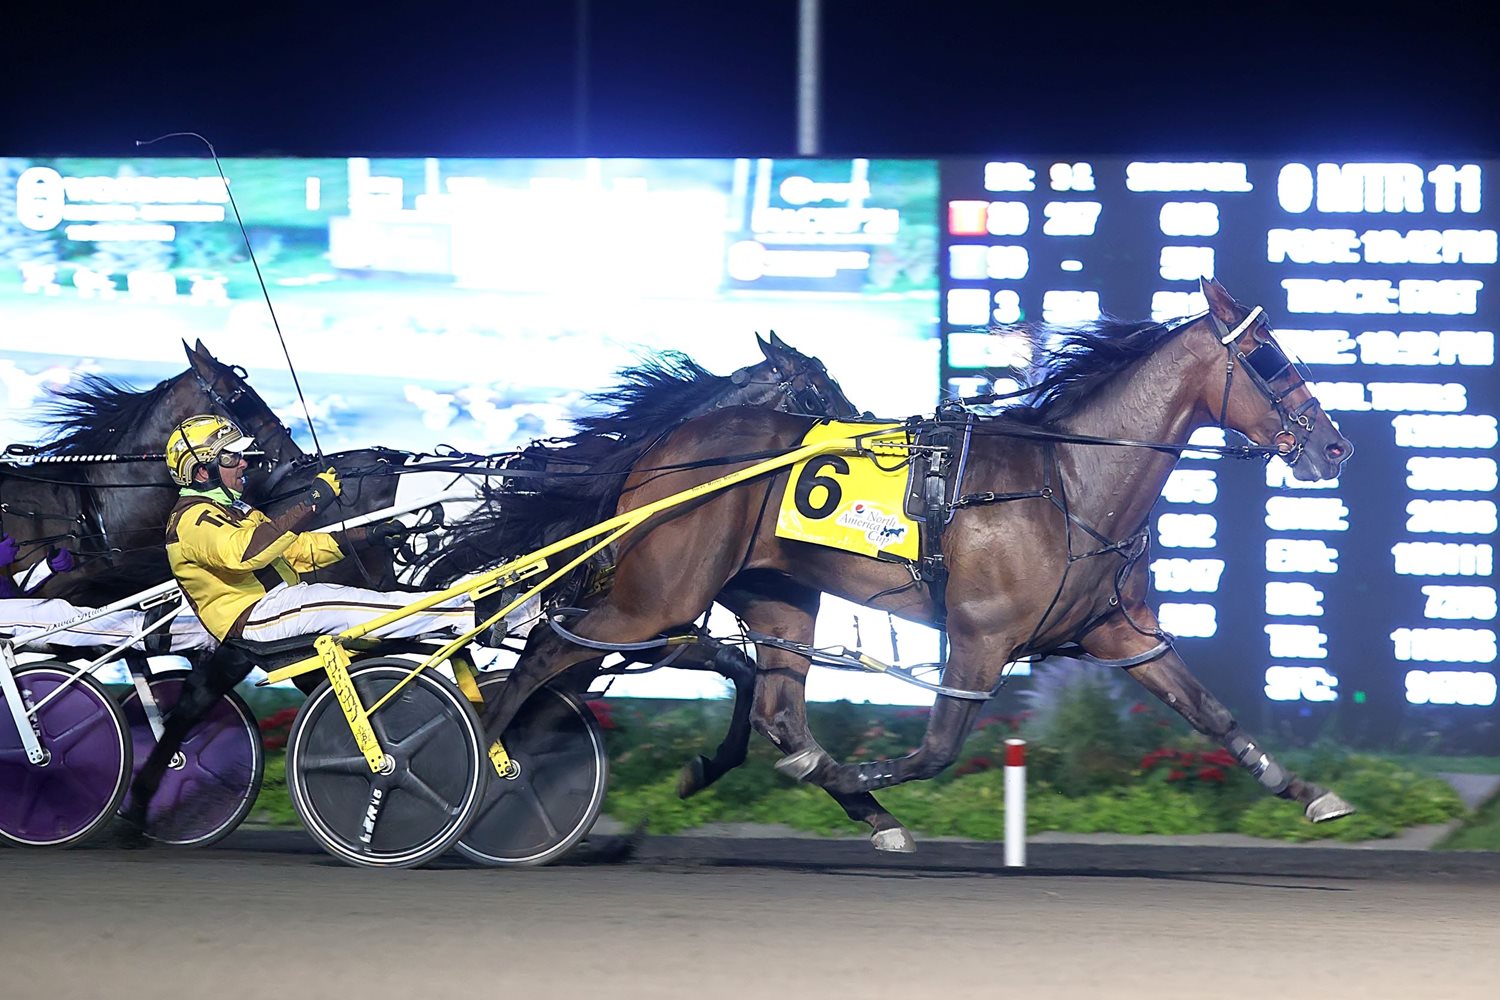 2021 Ontario Sires Stakes season was full of highlights